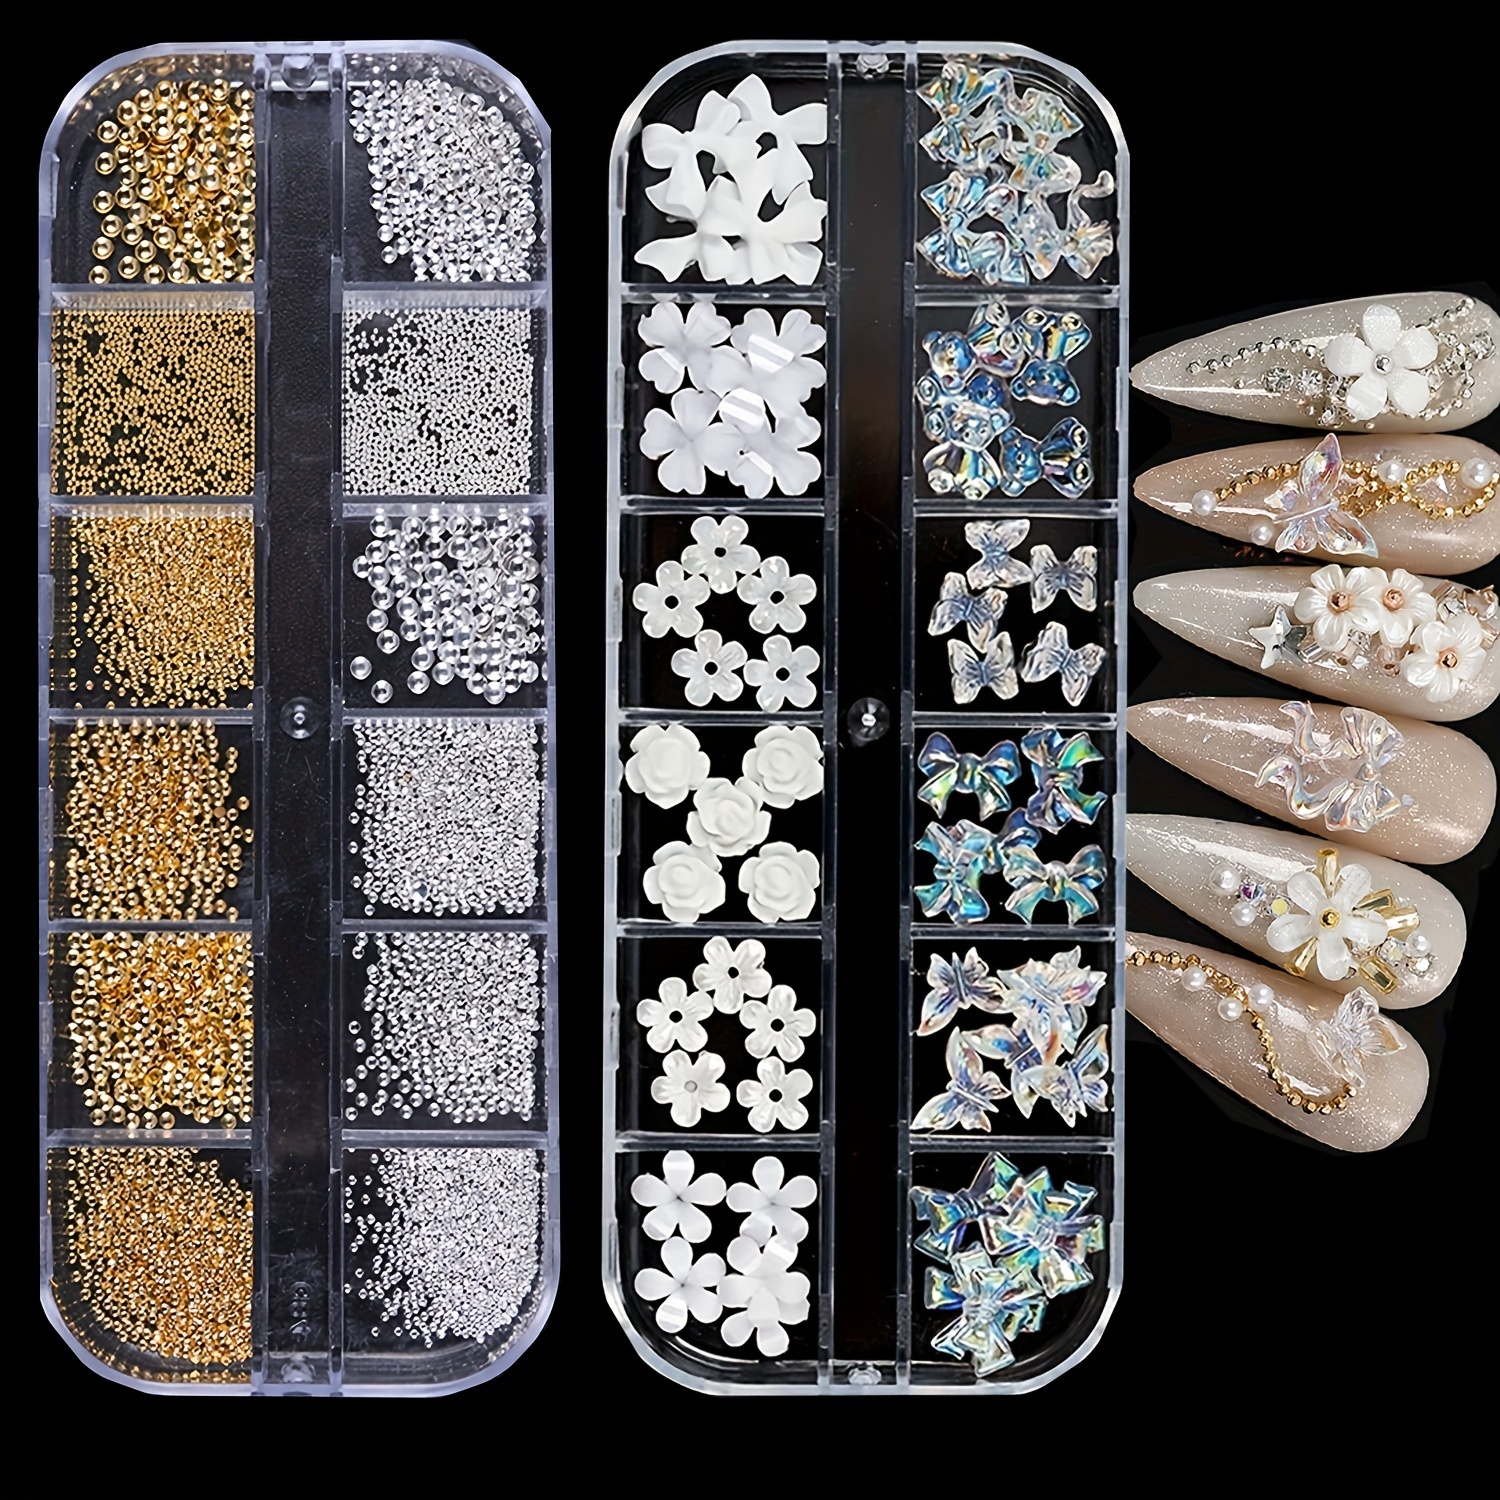 

2 Boxes (1000pcs) 3d Acrylic Butterfly White Flowers Bear Nail Charms Cute Nail Charms Mixed Starry Ab Crystal Nail Rhinestones Multi Sizes Crystal Gems Stones